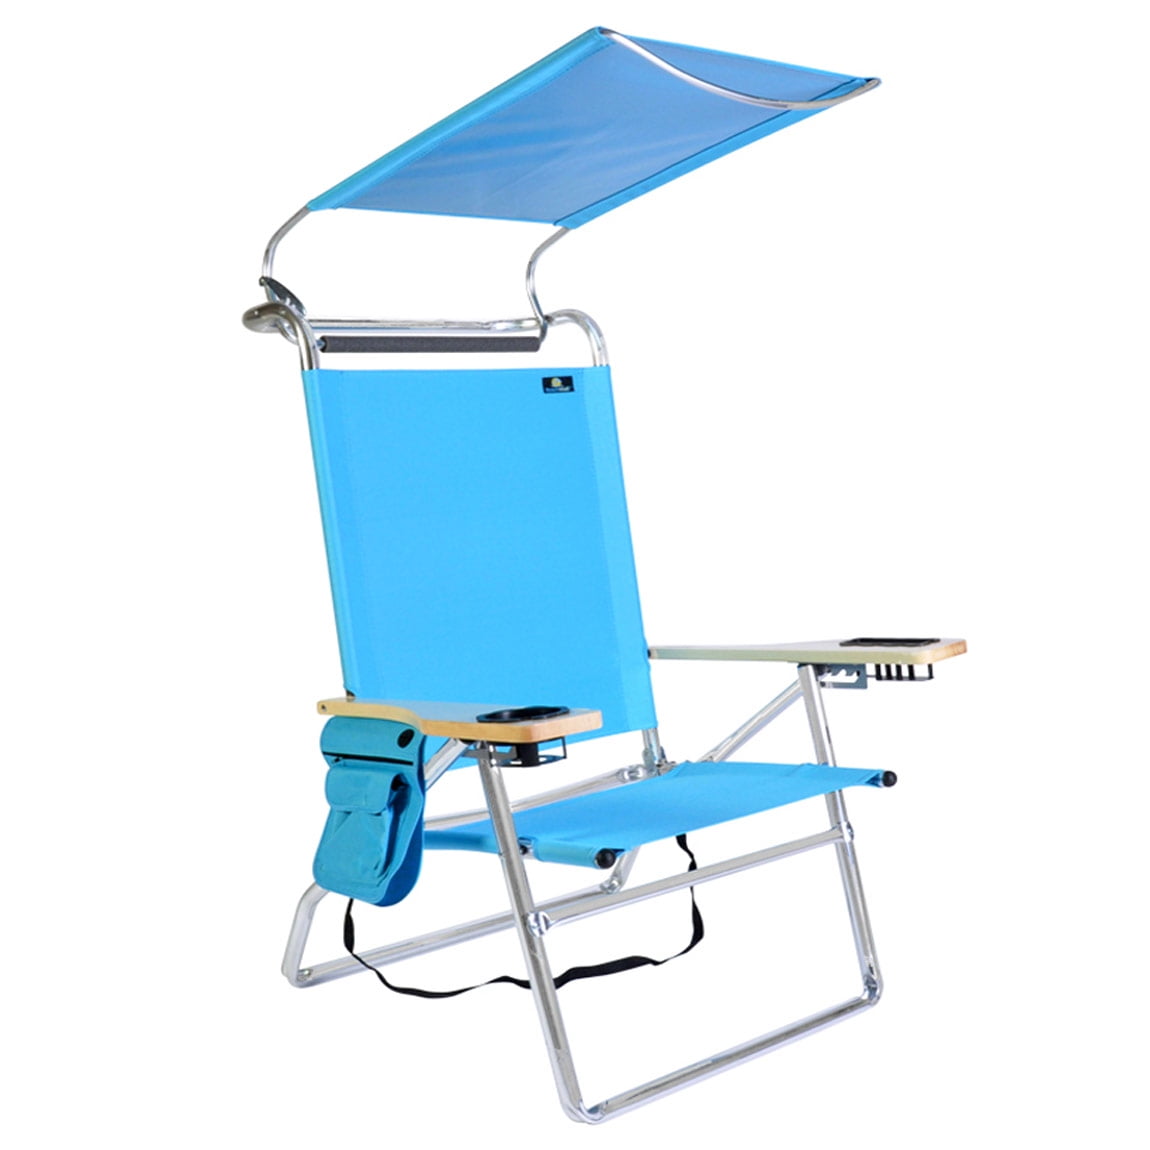 Beach Chair With Canopy Drink Holder, Portable High Chair With Canopy